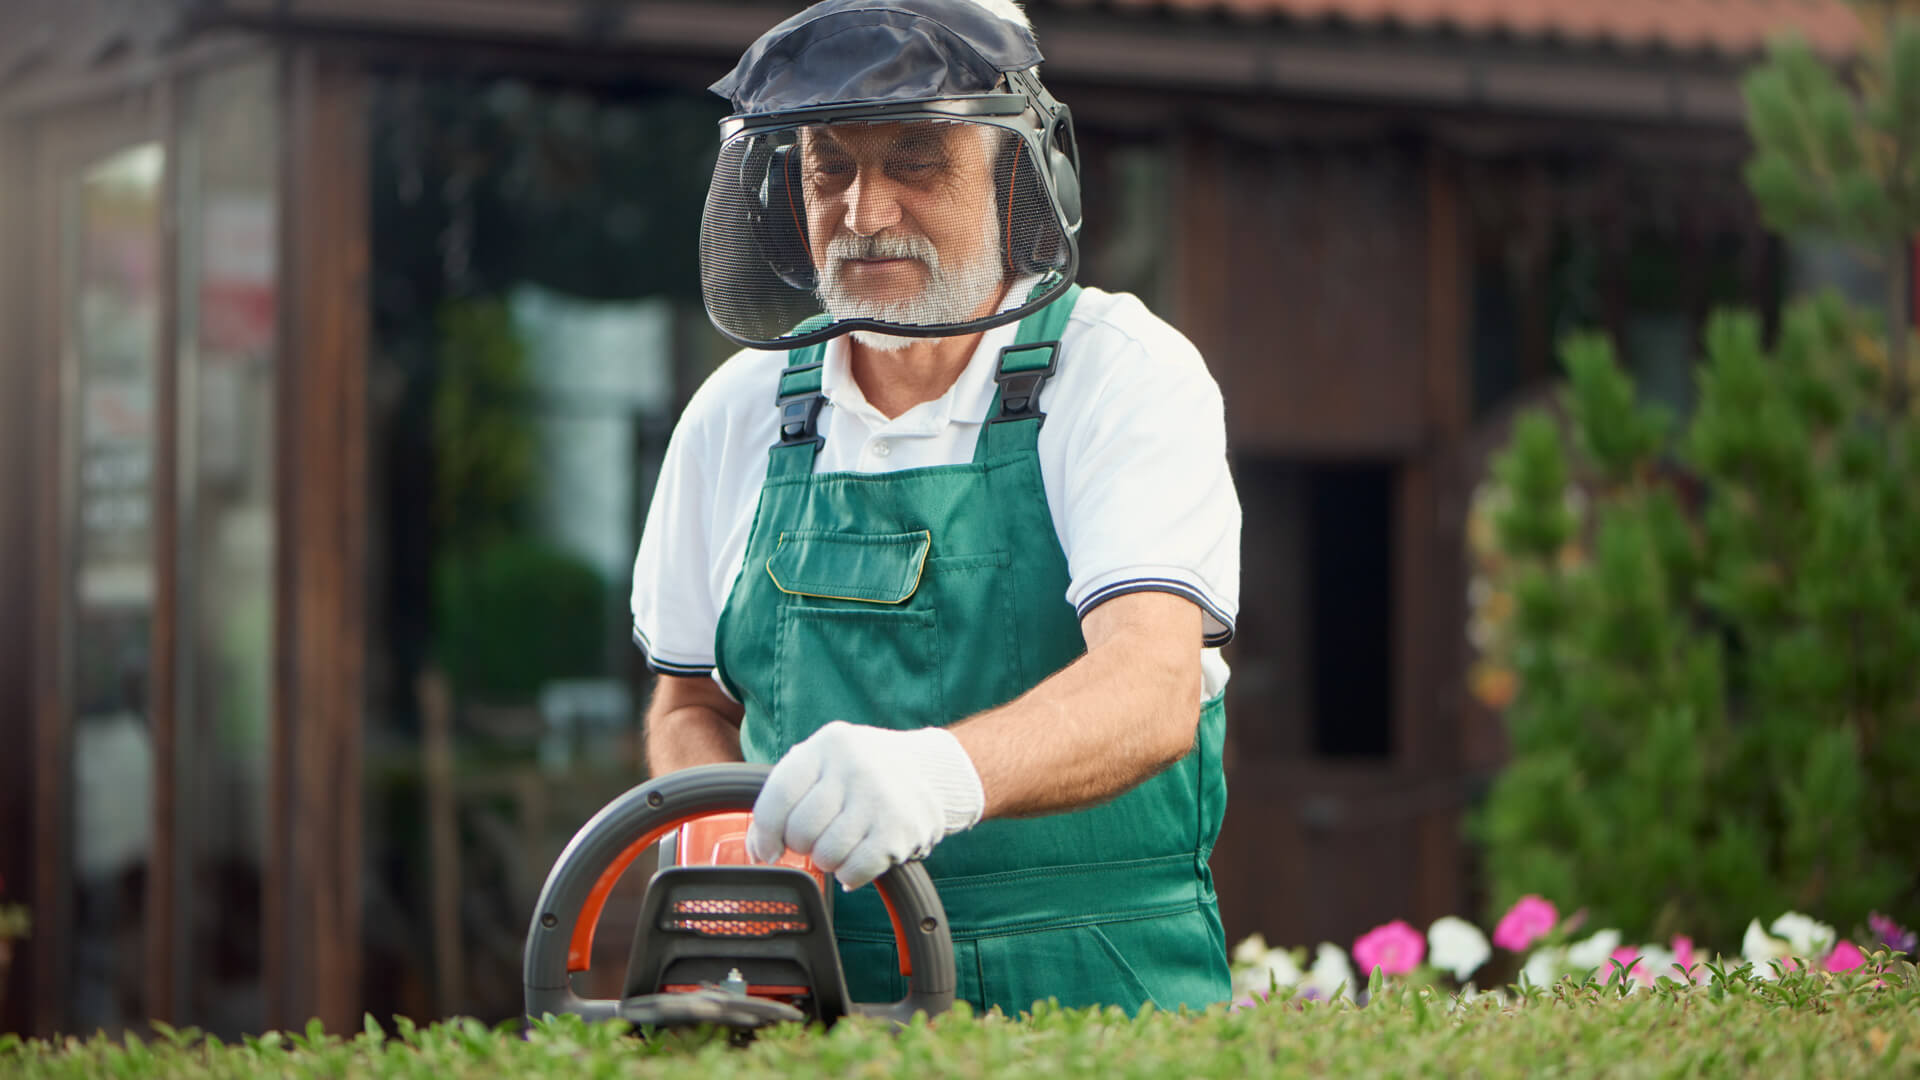 Retired But Want To Work? Try These 8 Jobs for Seniors That Pay Weekly